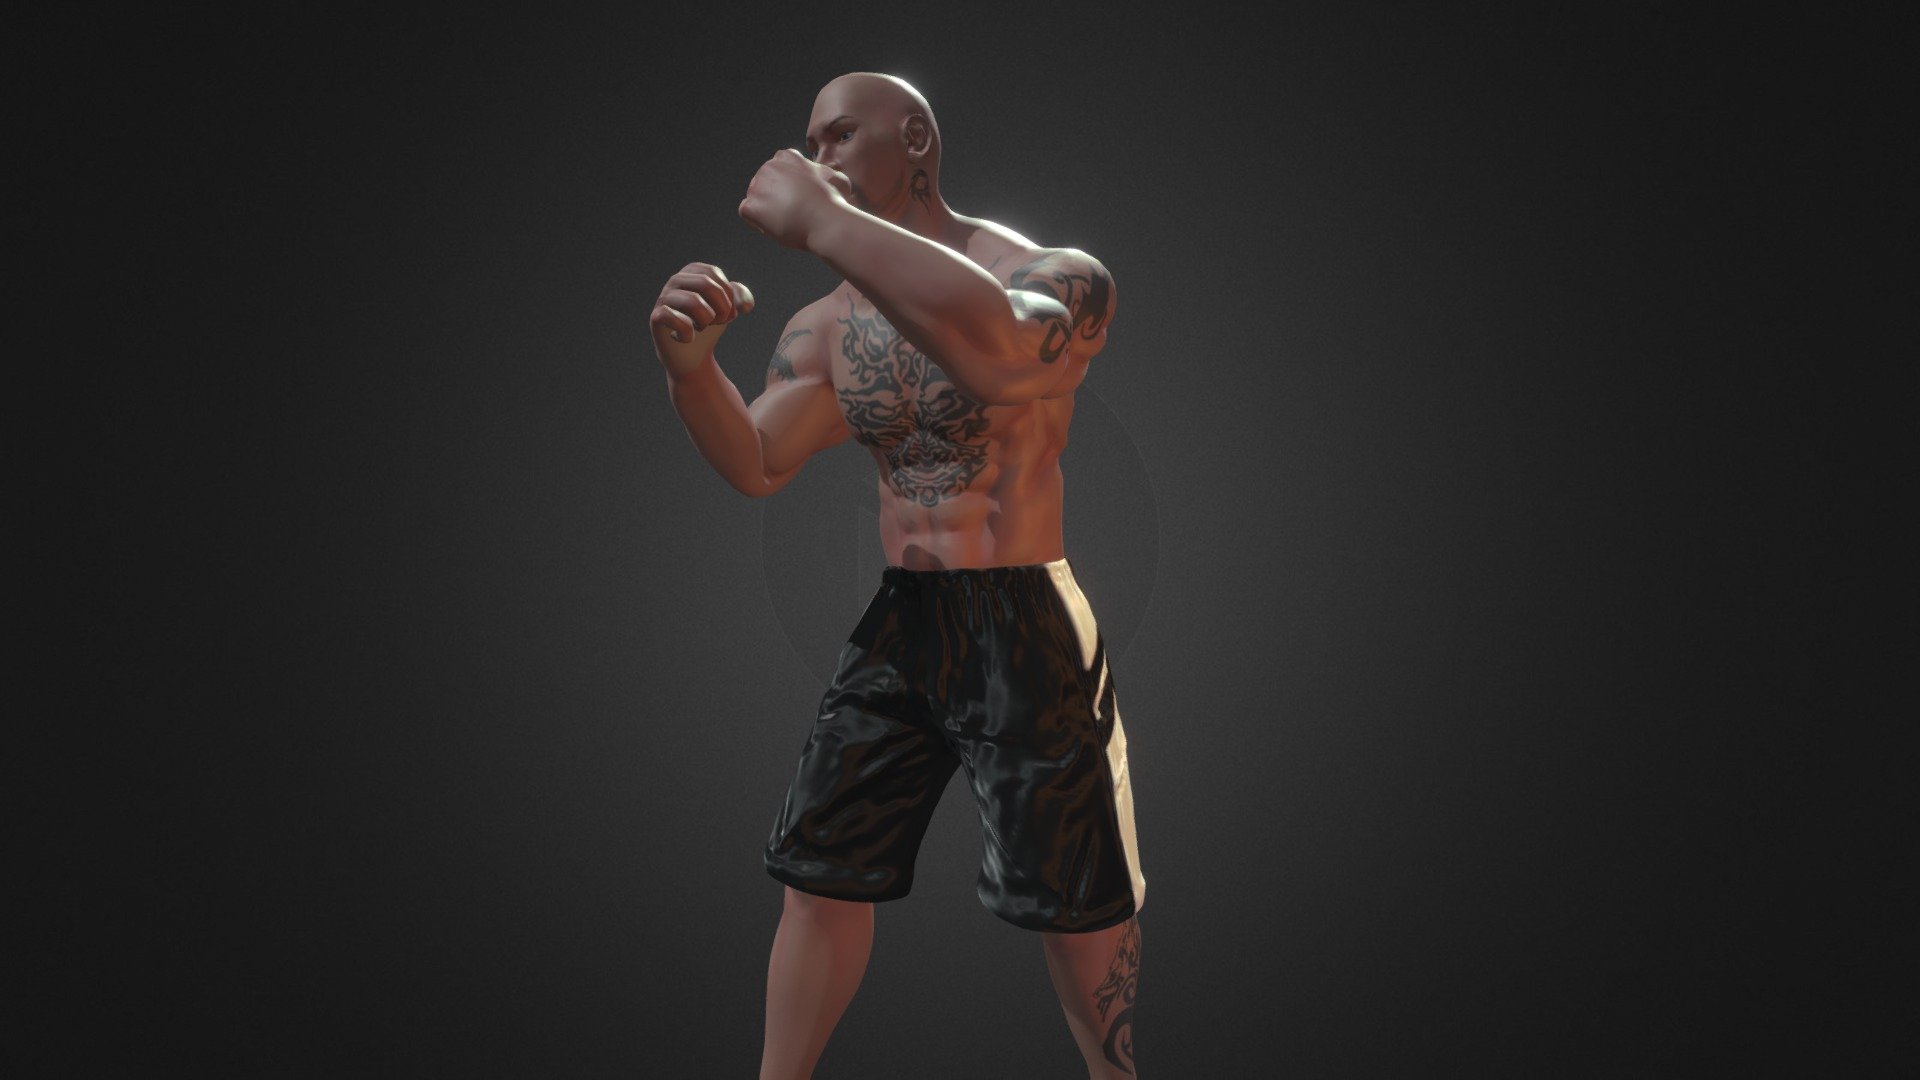 Boxer 3D character riged model, buy the model for your video, games and animations. Made by software Blender. redy for games with humanoid rig.

Forbidden: re-upload on another site and platforms, make a profit with it.

Allowed use this model for visual and art projects, video or games and presentations with showing my credits 3d model